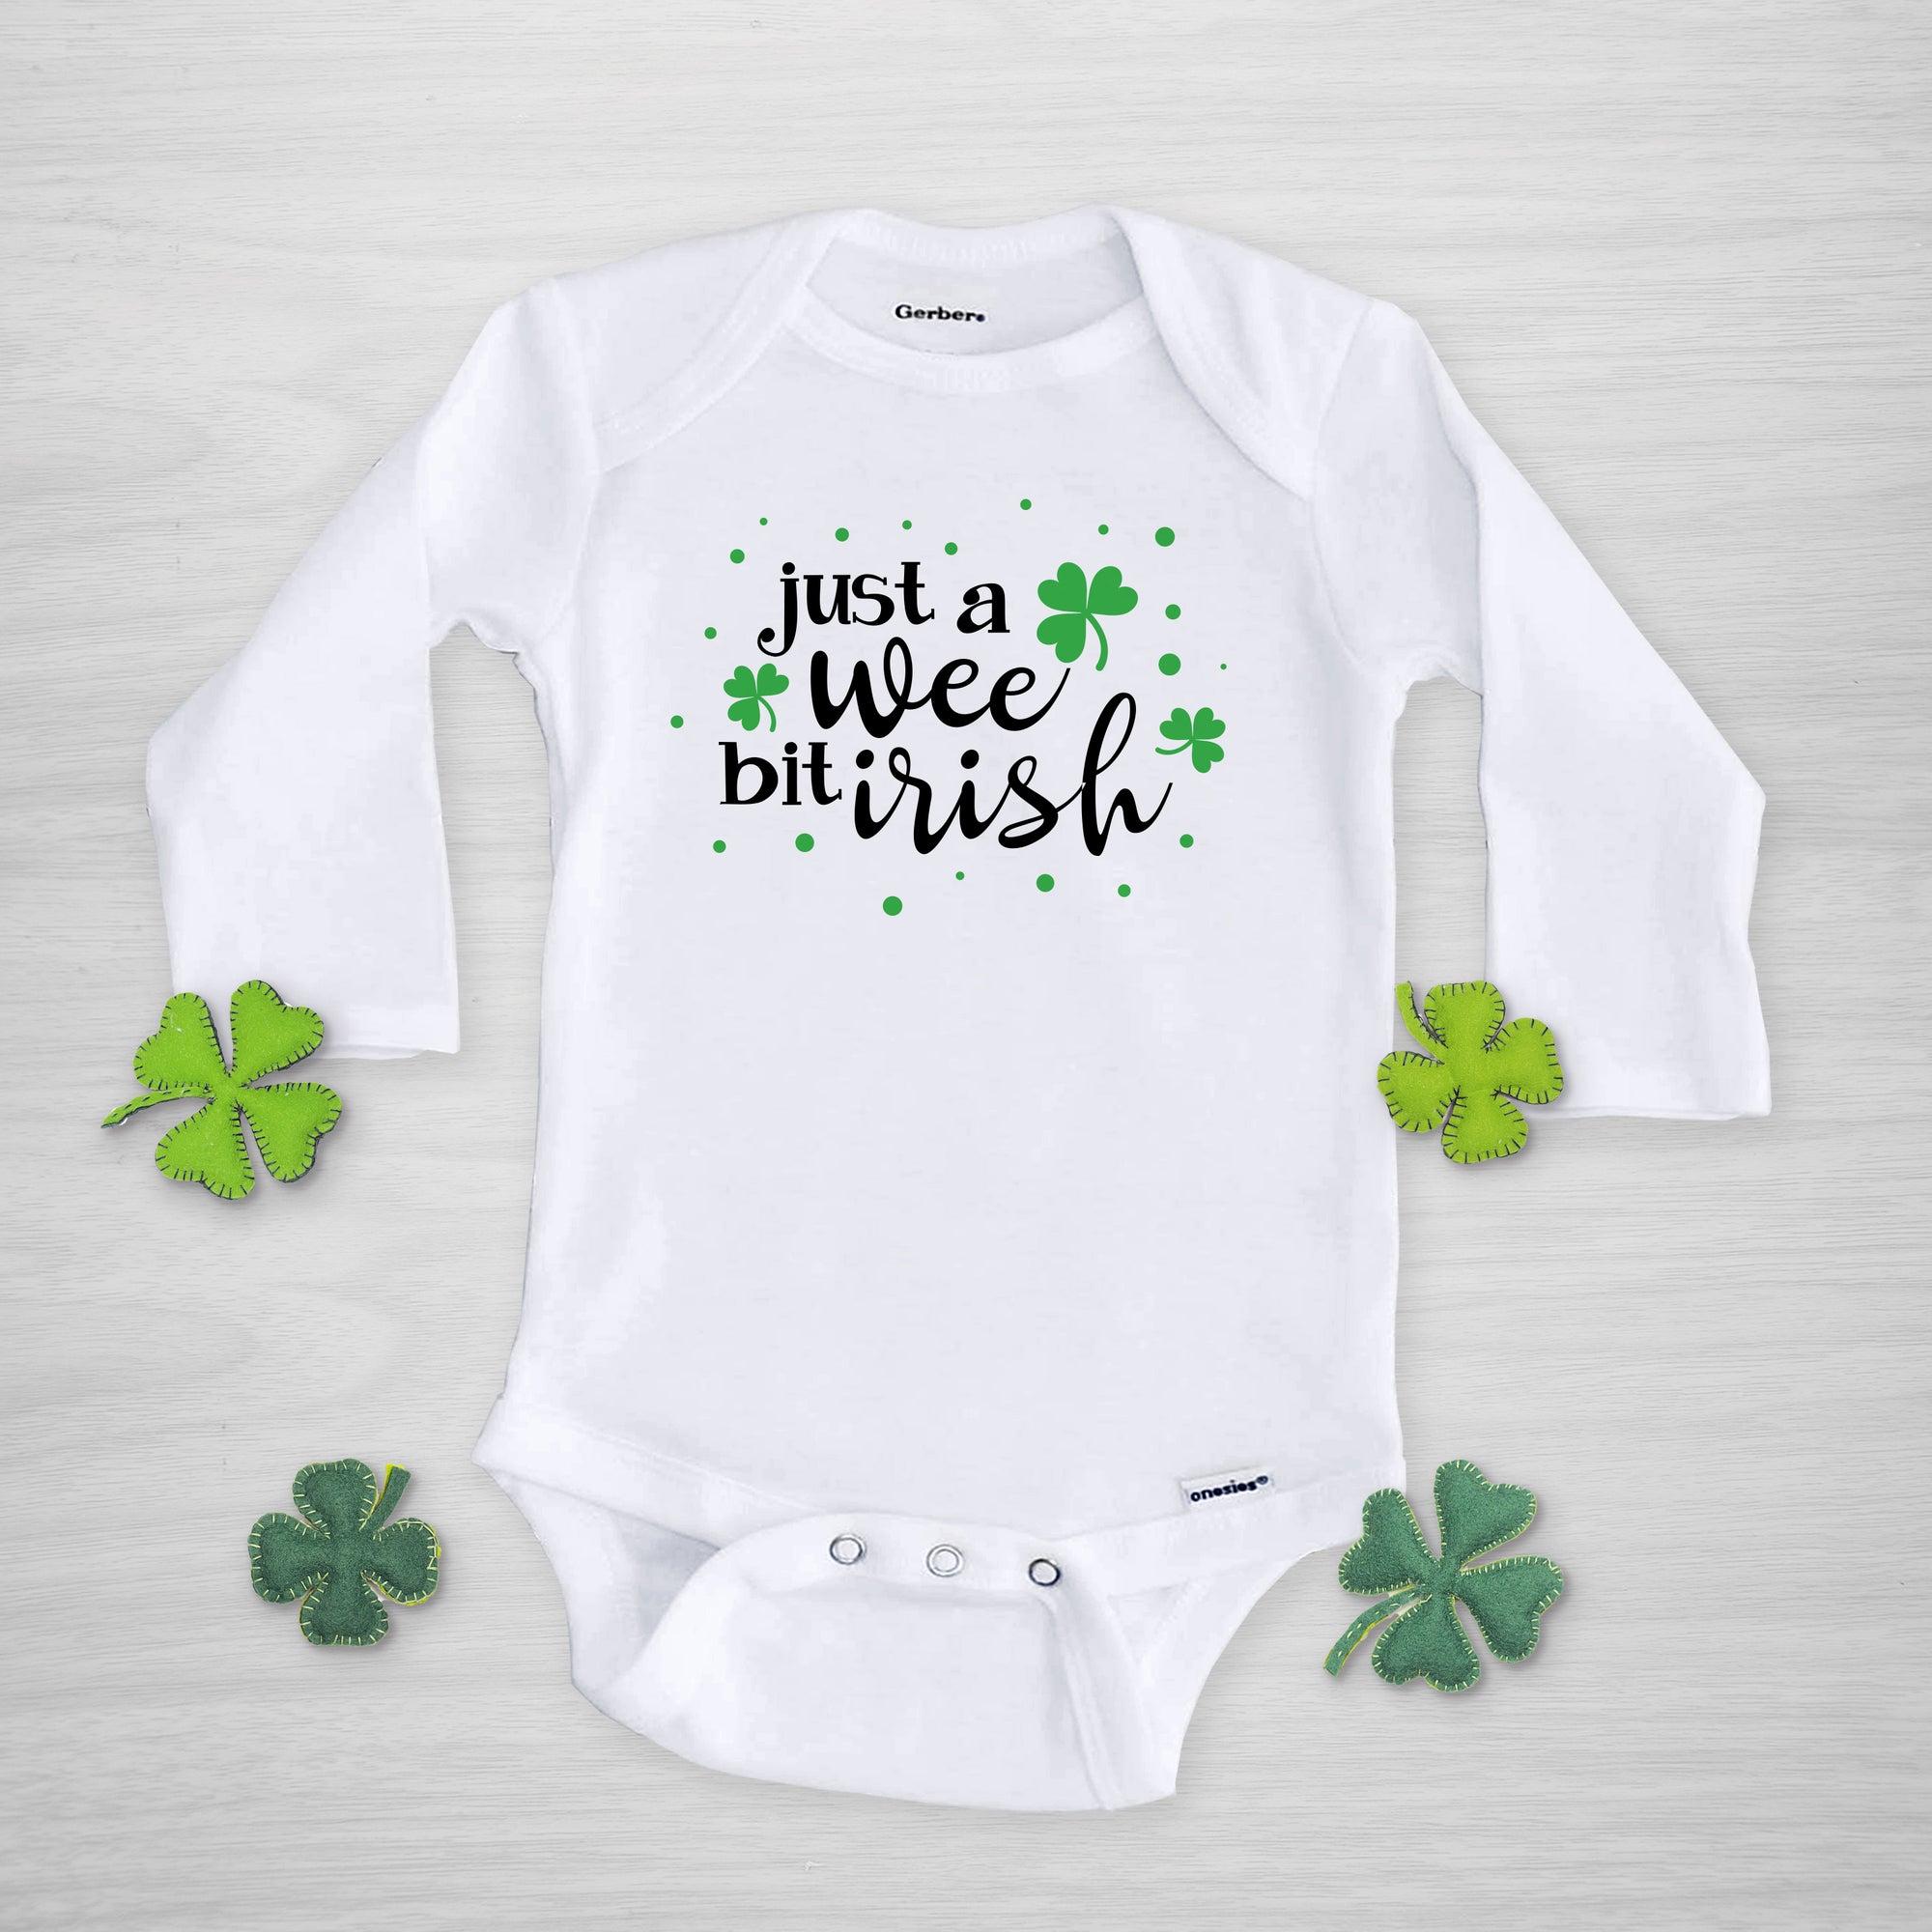 Just a Wee Bit Irish Gerber Onesie for St. Patrick's Day, short sleeved